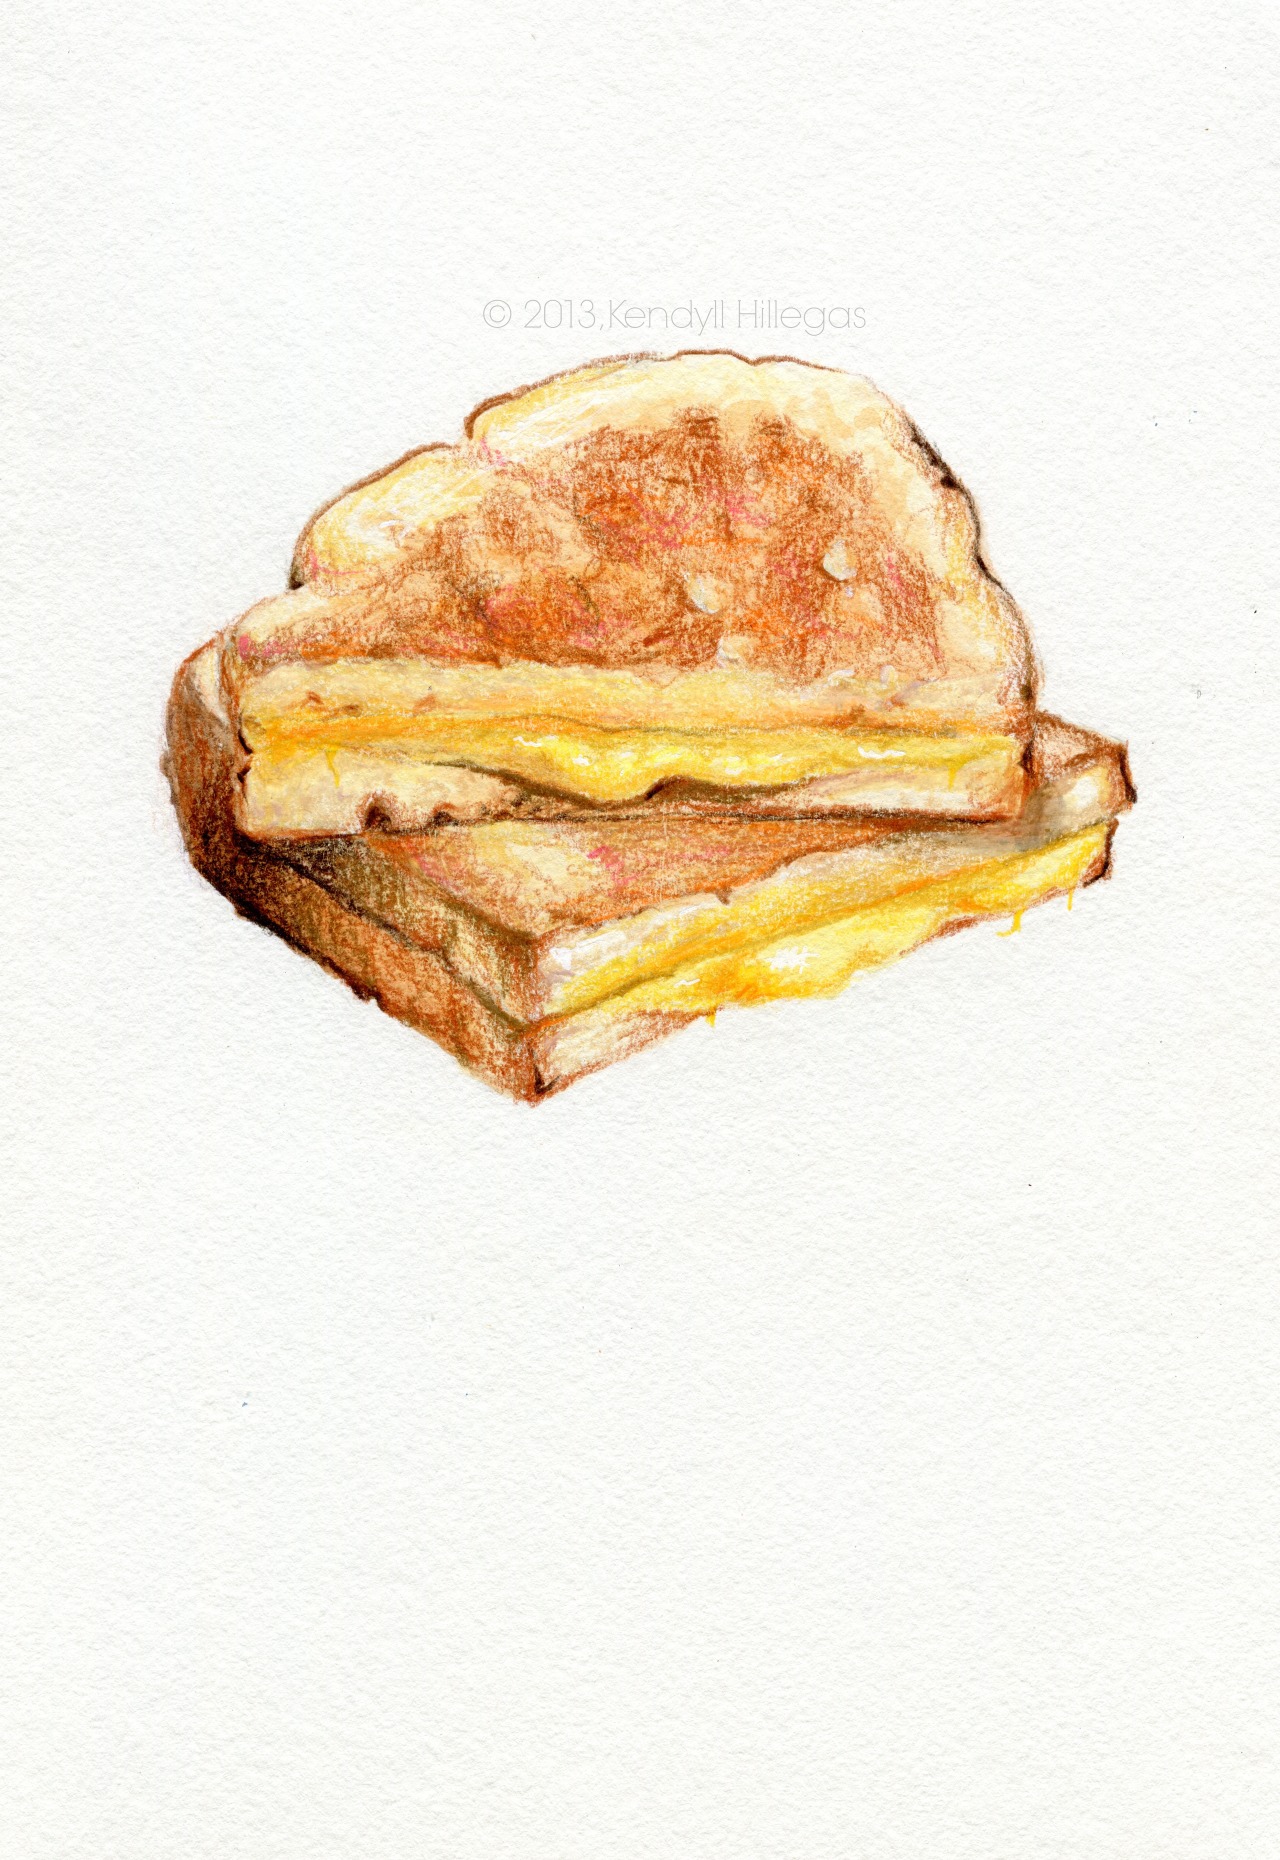 Kendyll Hillegas | Grilled cheese, 2013 Watercolor, colored pencil, gouache, 11x7.5 | Tumblr, Facebook